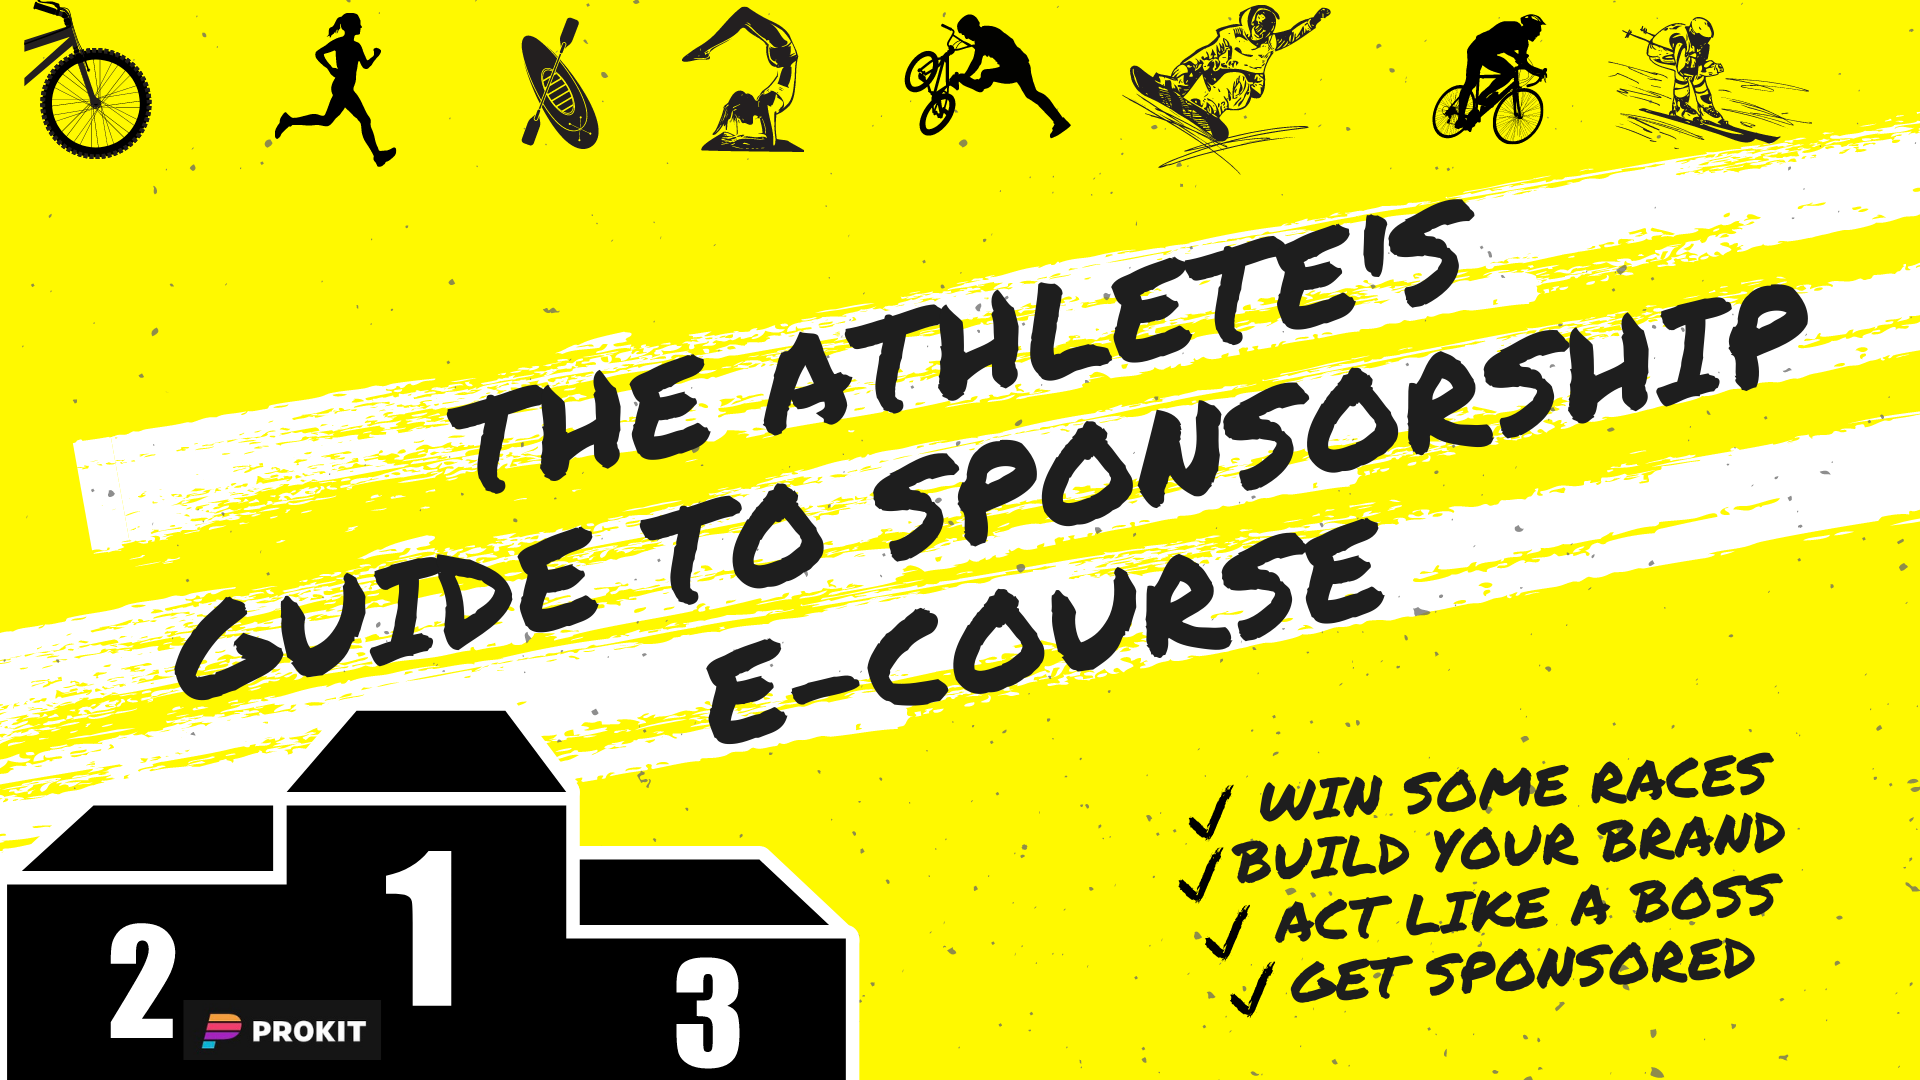 Graphic promoting "the athlete's guide to sponsorship e-course" with illustrations of athletes in action and text highlighting course benefits such as winning races, building a brand, and getting sponsored.